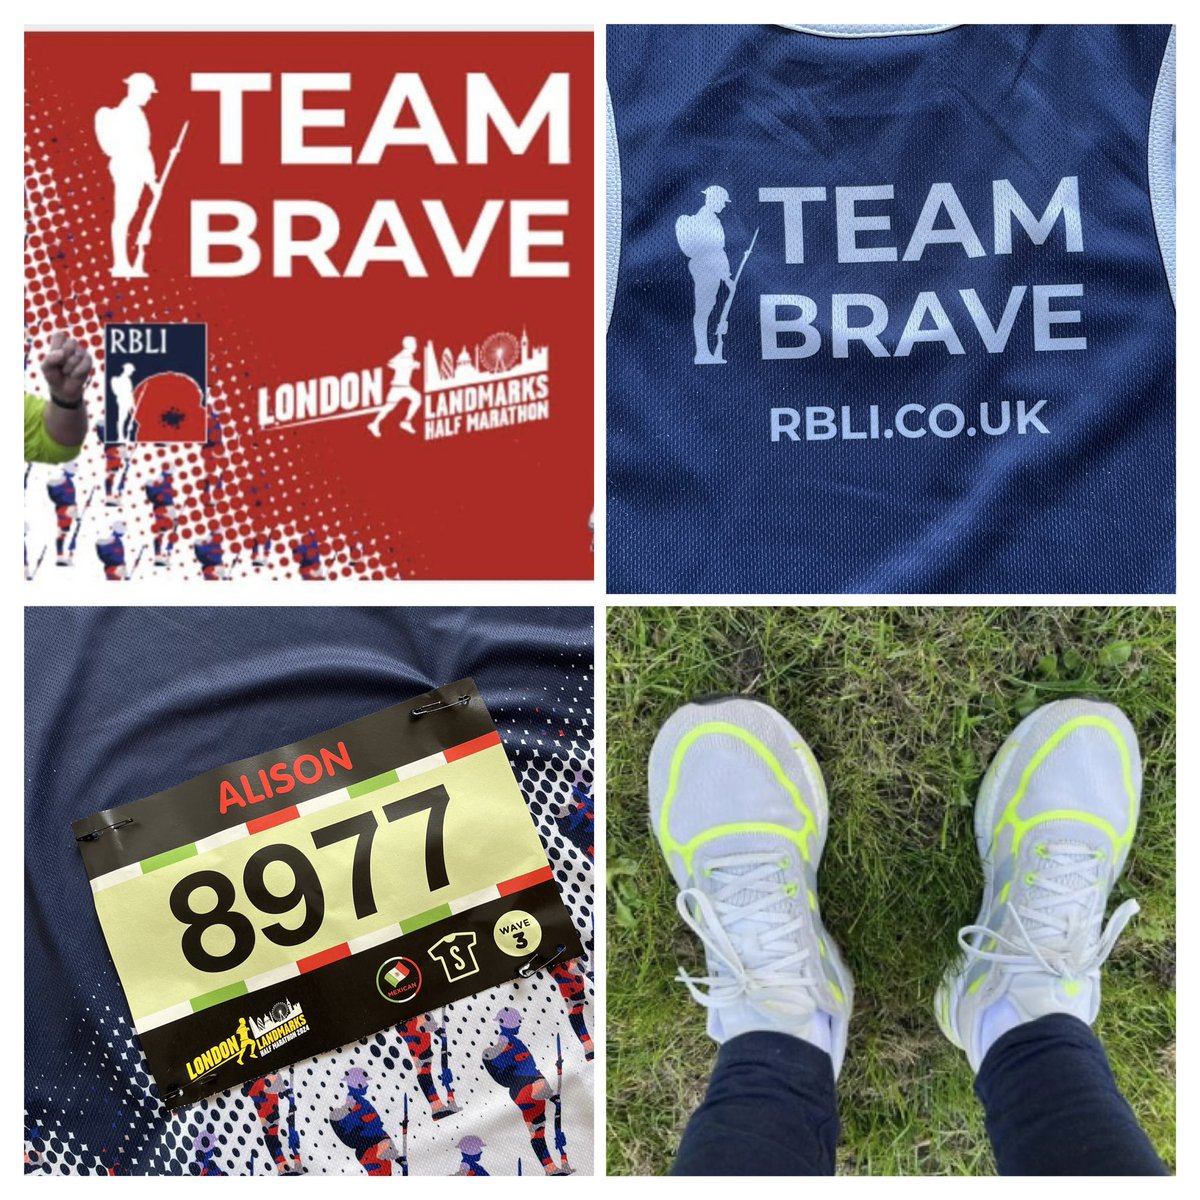 Tomorrow is the day !! I will be running the @LLHalf for @RBLI with #TeamBrave ❤️💙 If you are in London, and spot the Team Brave vests, give us a cheer 🙌 Thank you to everyone who has supported, encouraged and, more importantly, donated 🙏 Now time to do my part 🏃🏻‍♀️